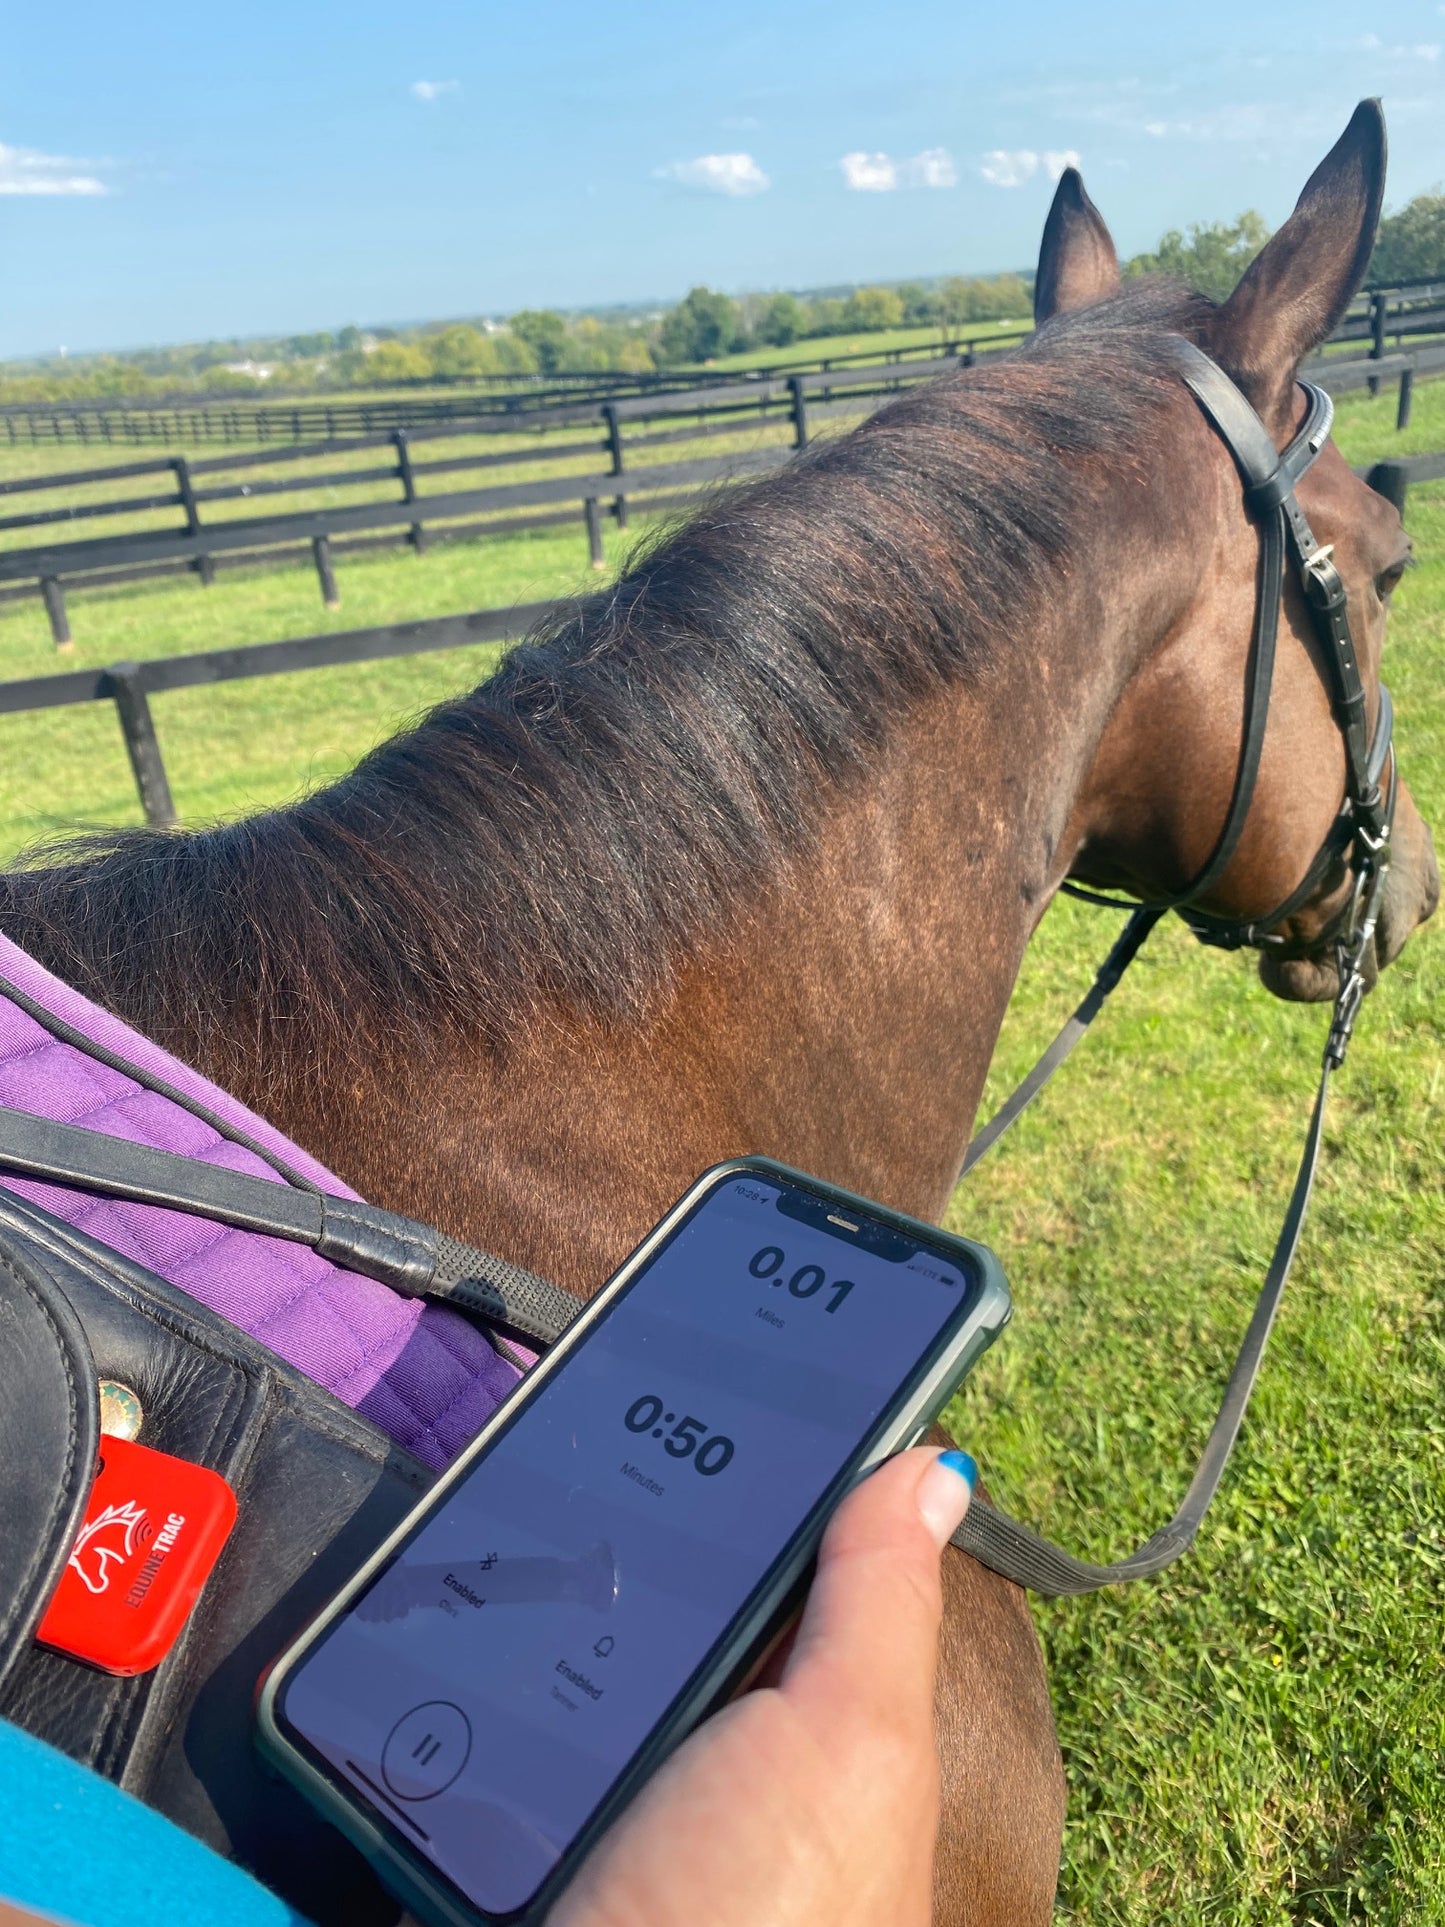 Sale! EquineTrac Wireless Smart Sensor for Fall Detection with Protective Case & Saddle Mount Clip